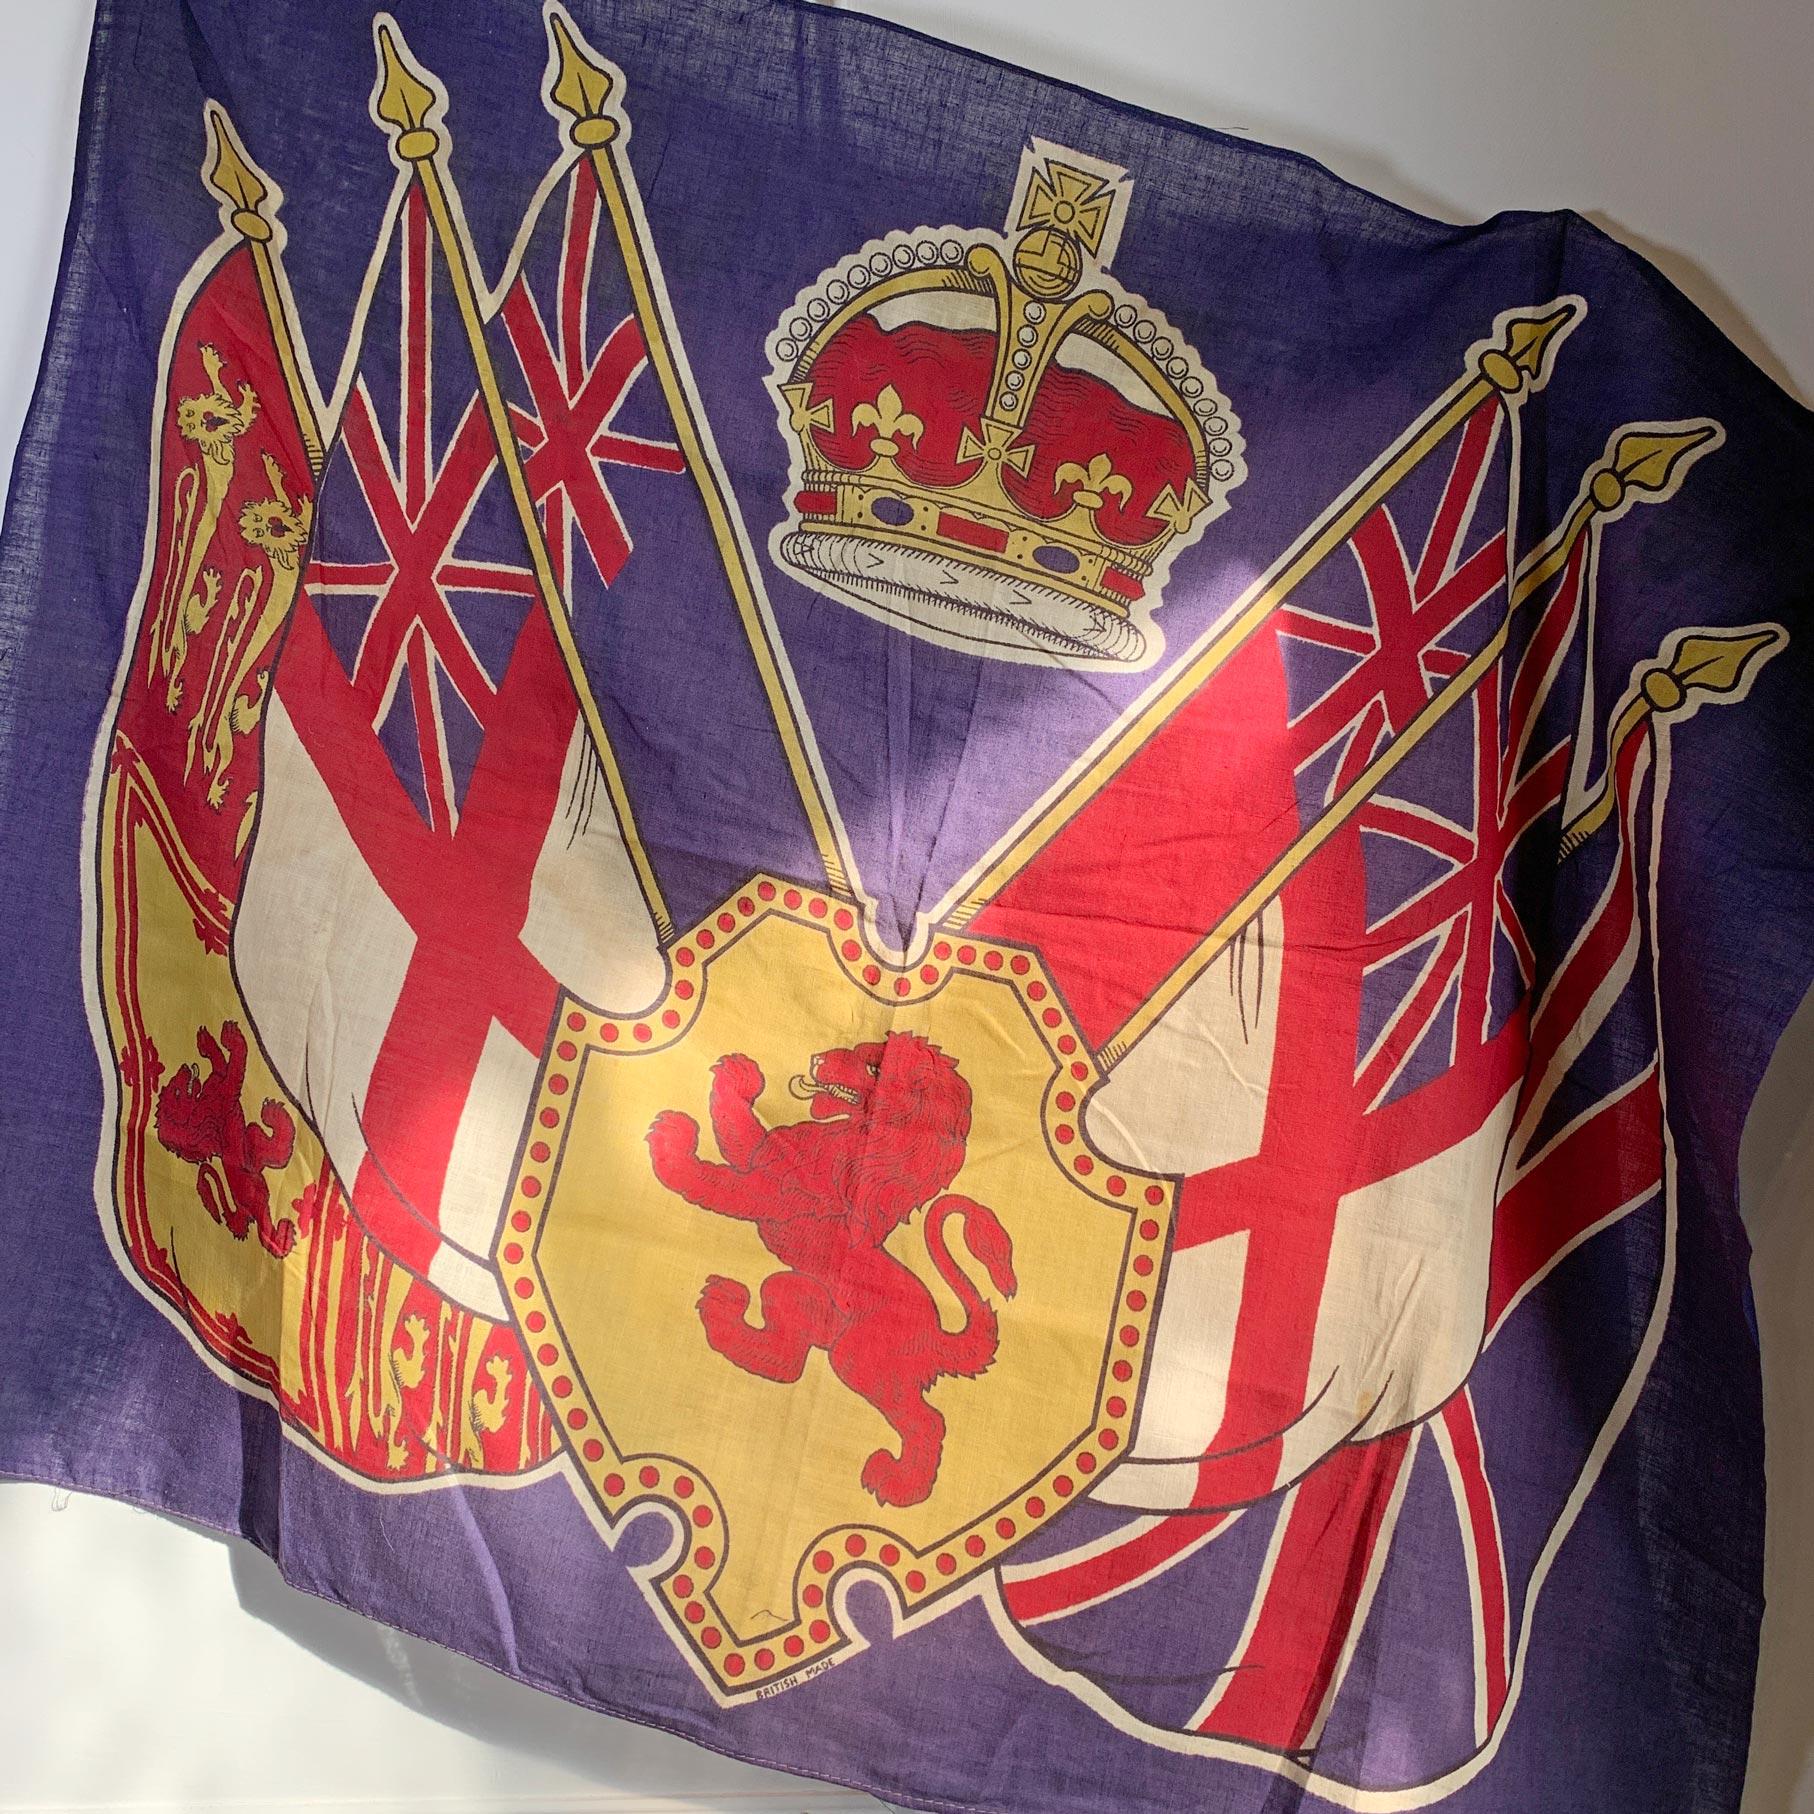 British Royal Family

A Rare And Historical Royal Coronation Flag from The Coronation Of HRH King George VI in 1937. 

George VI (Albert Frederick Arthur George; 14 December 1895 – 6 February 1952) was King of the United Kingdom and the Dominions of